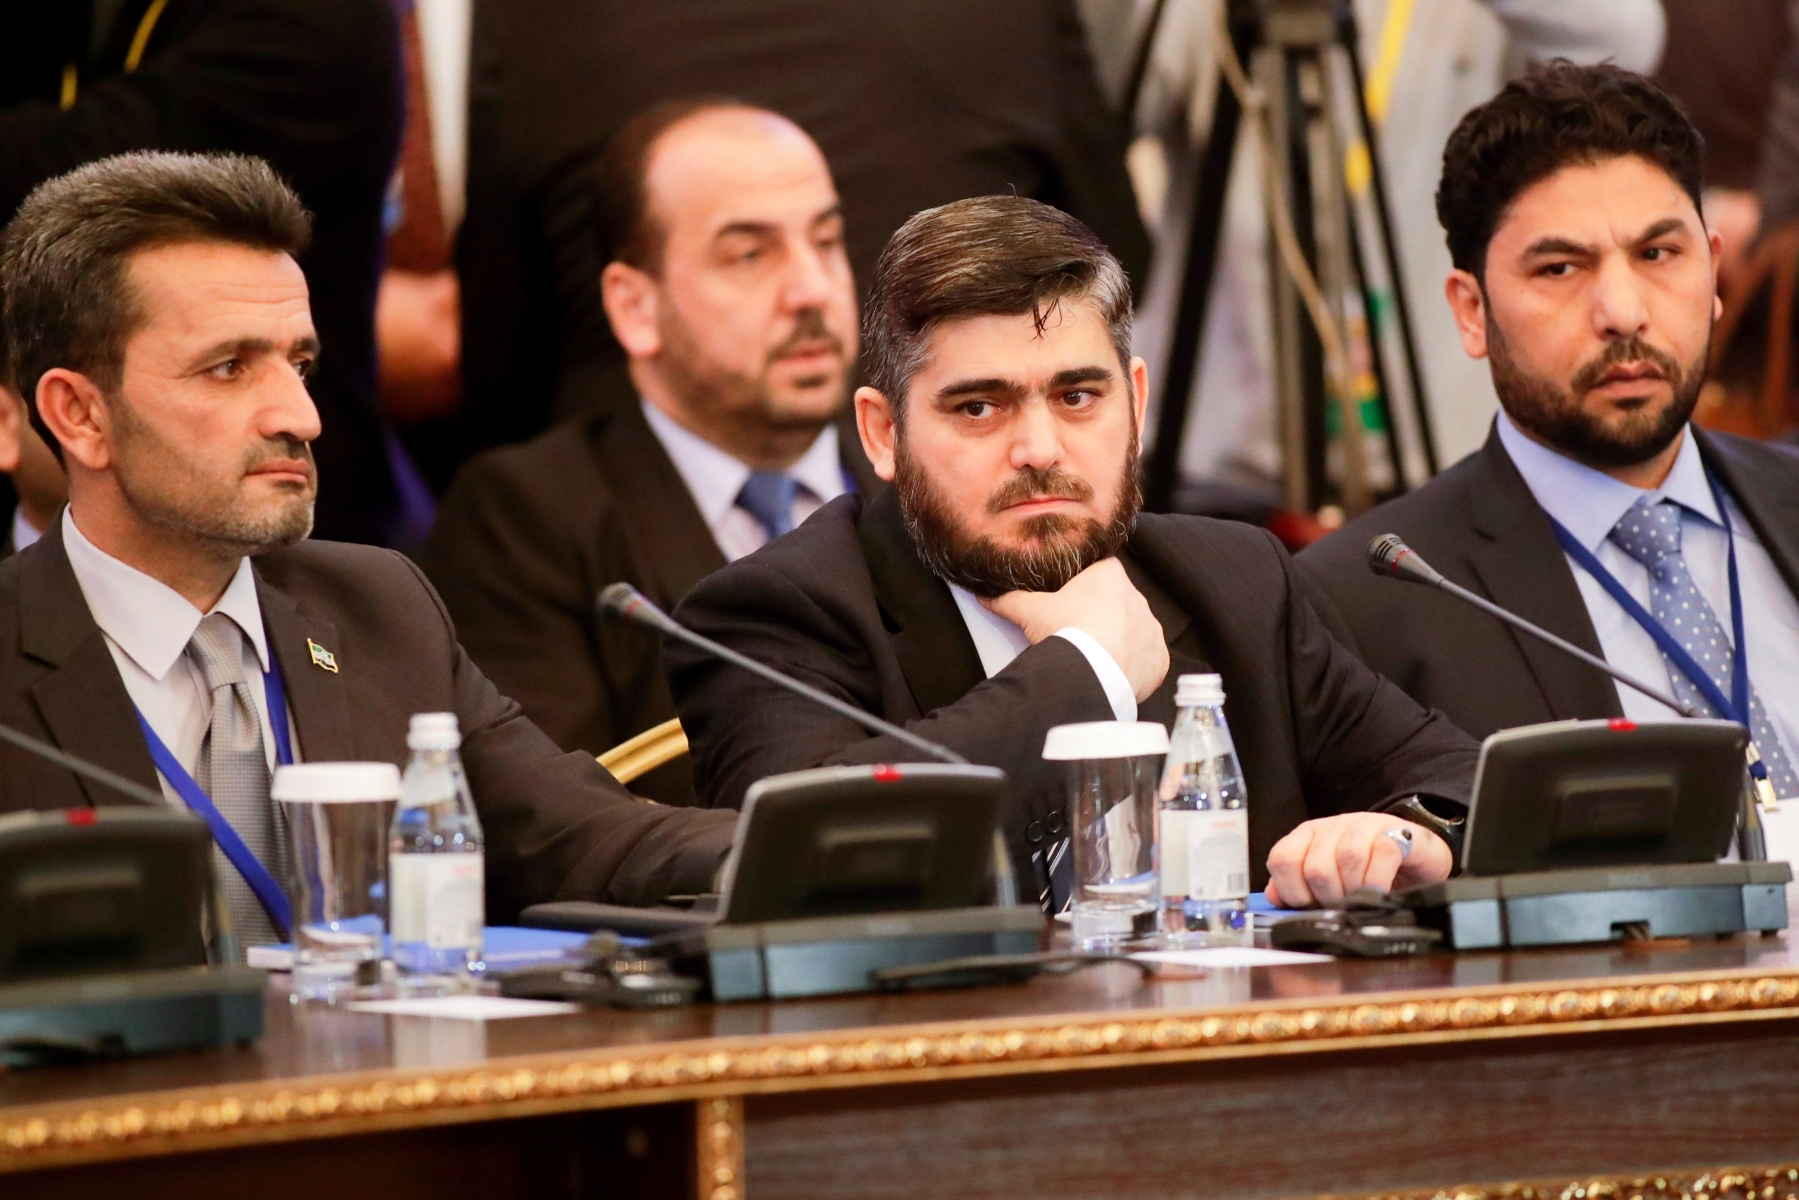 Mohammed Alloush, center, head of a Syrian opposition delegation, and other members attend talks on Syrian peace in Astana, Kazakhstan, Monday, Jan. 23, 2017. The talks are the latest attempt to forge a political settlement to end a war that has by most estimates killed more than 400,000 people since March 2011 and displaced more than half the country's population. (AP Photo/Sergei Grits) Kazakhstan Syria